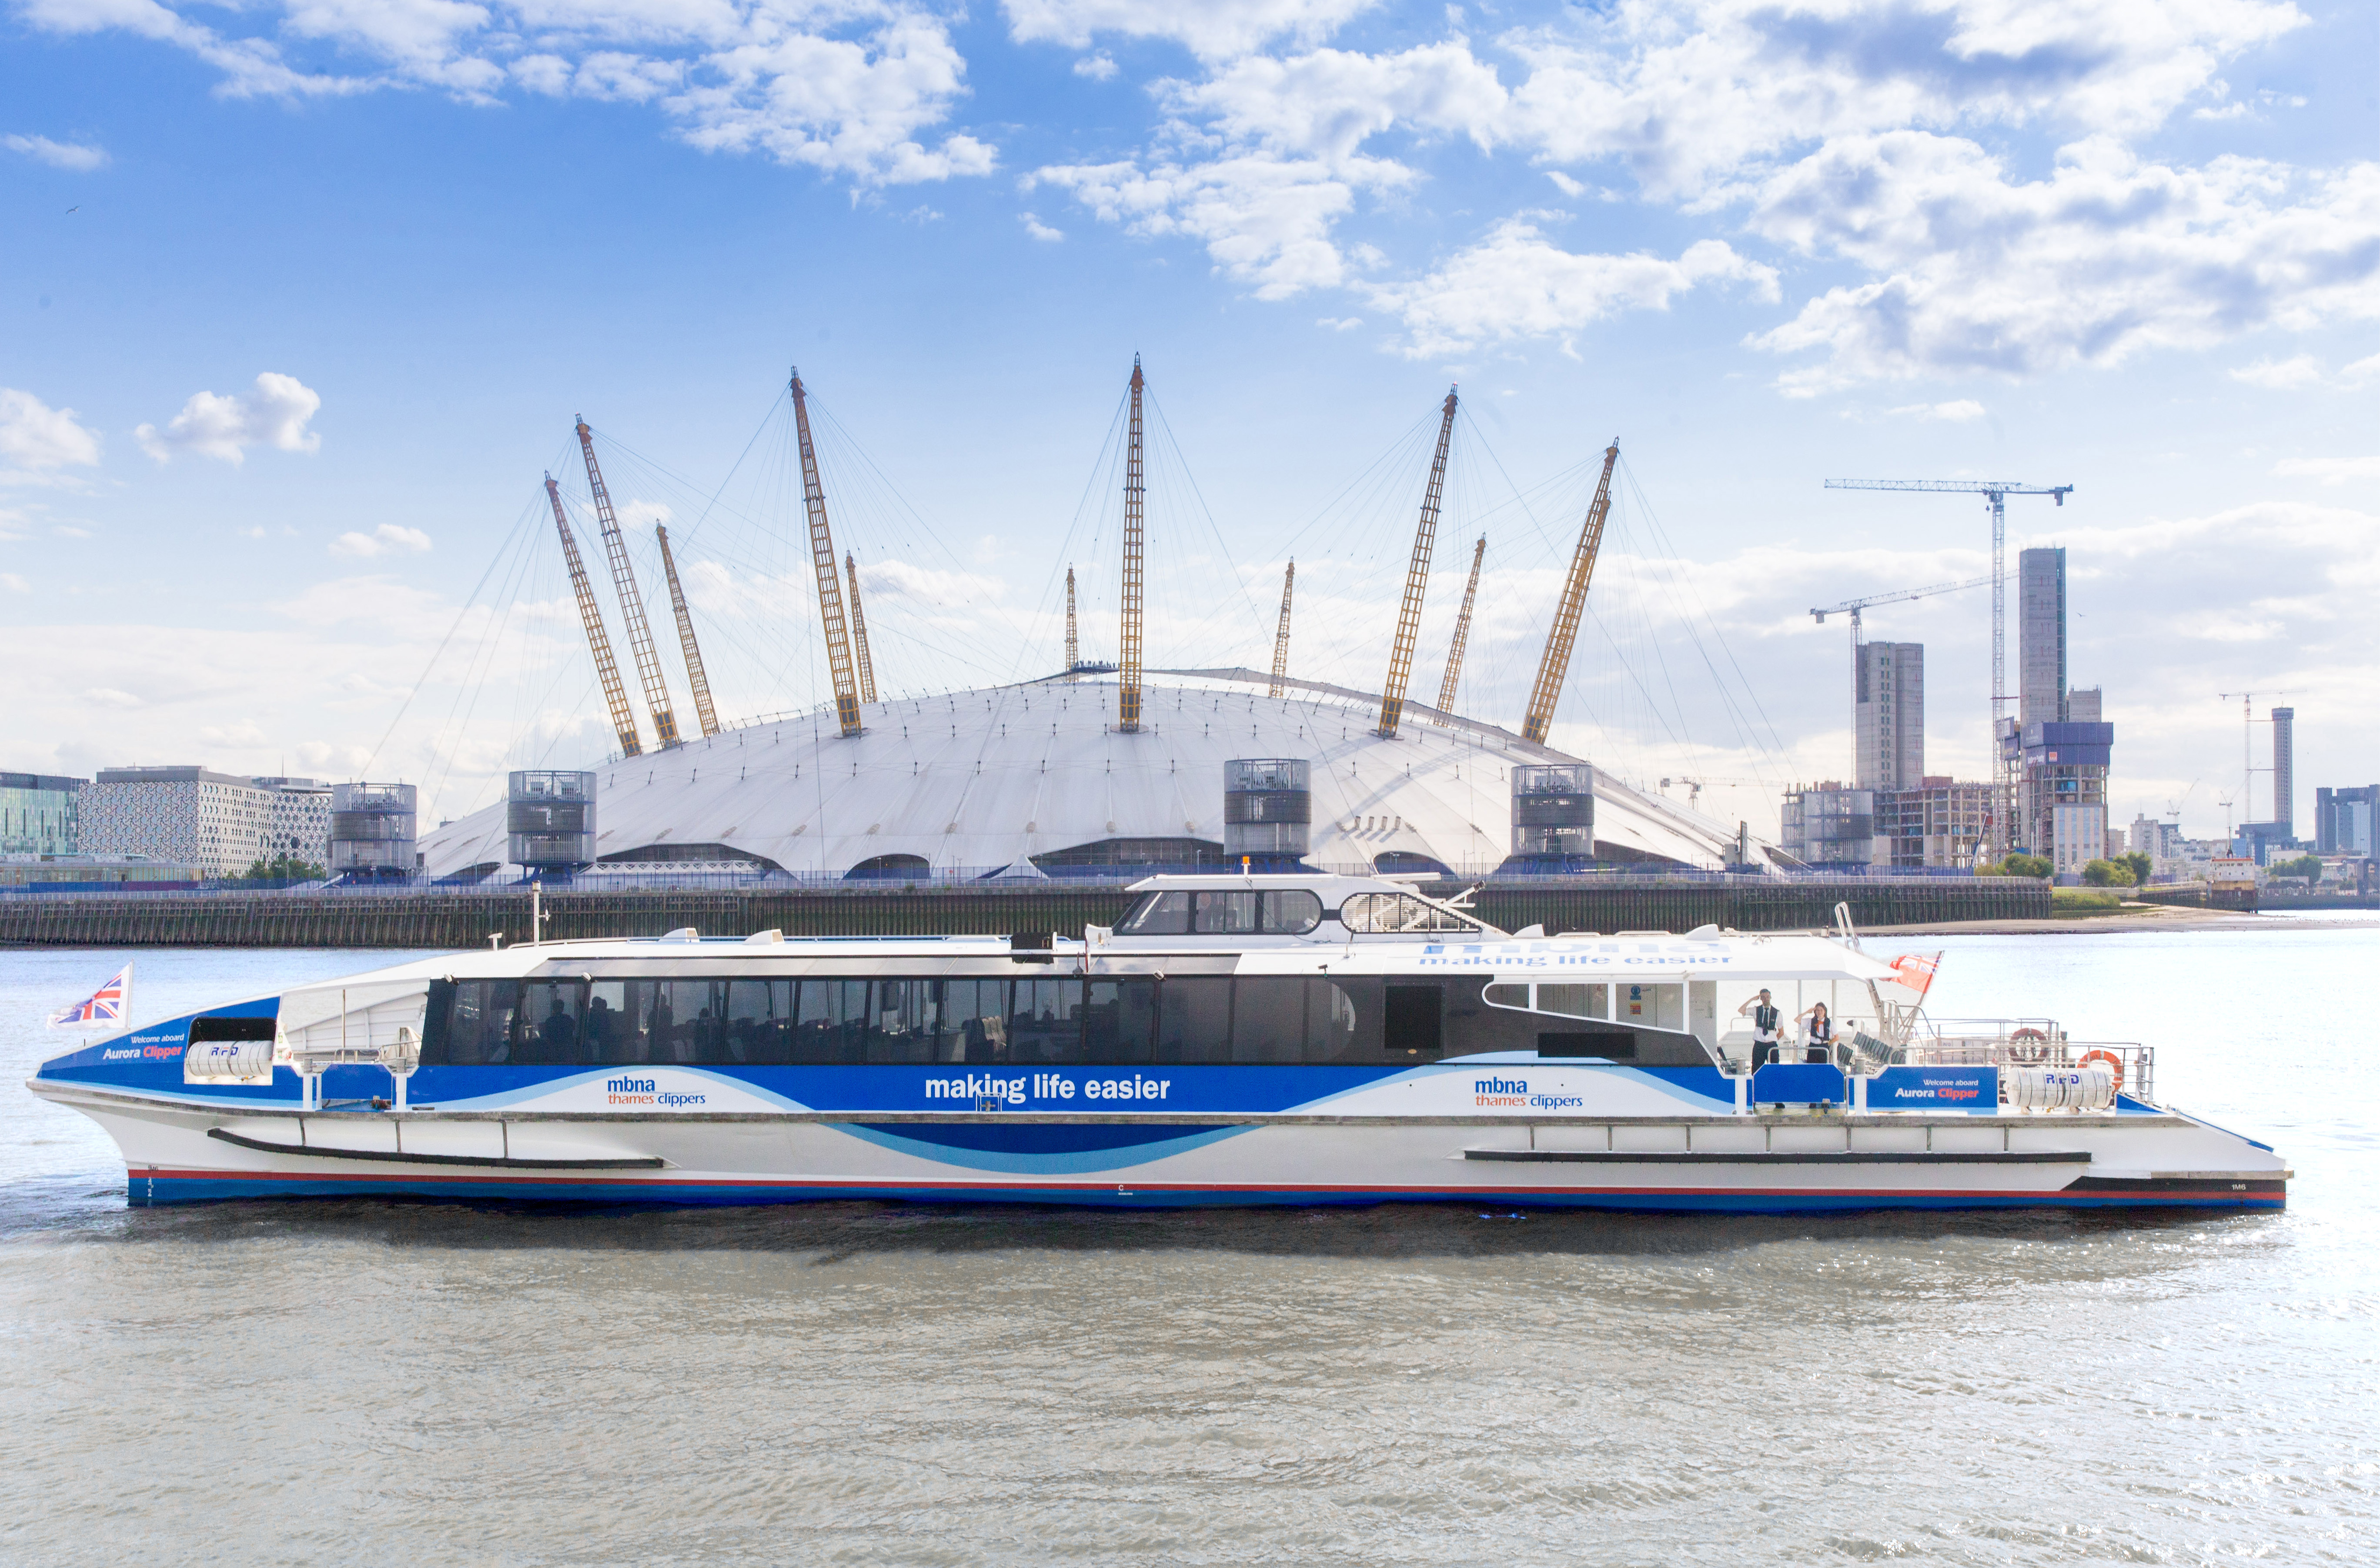 River bus :: Getting Here | The O2